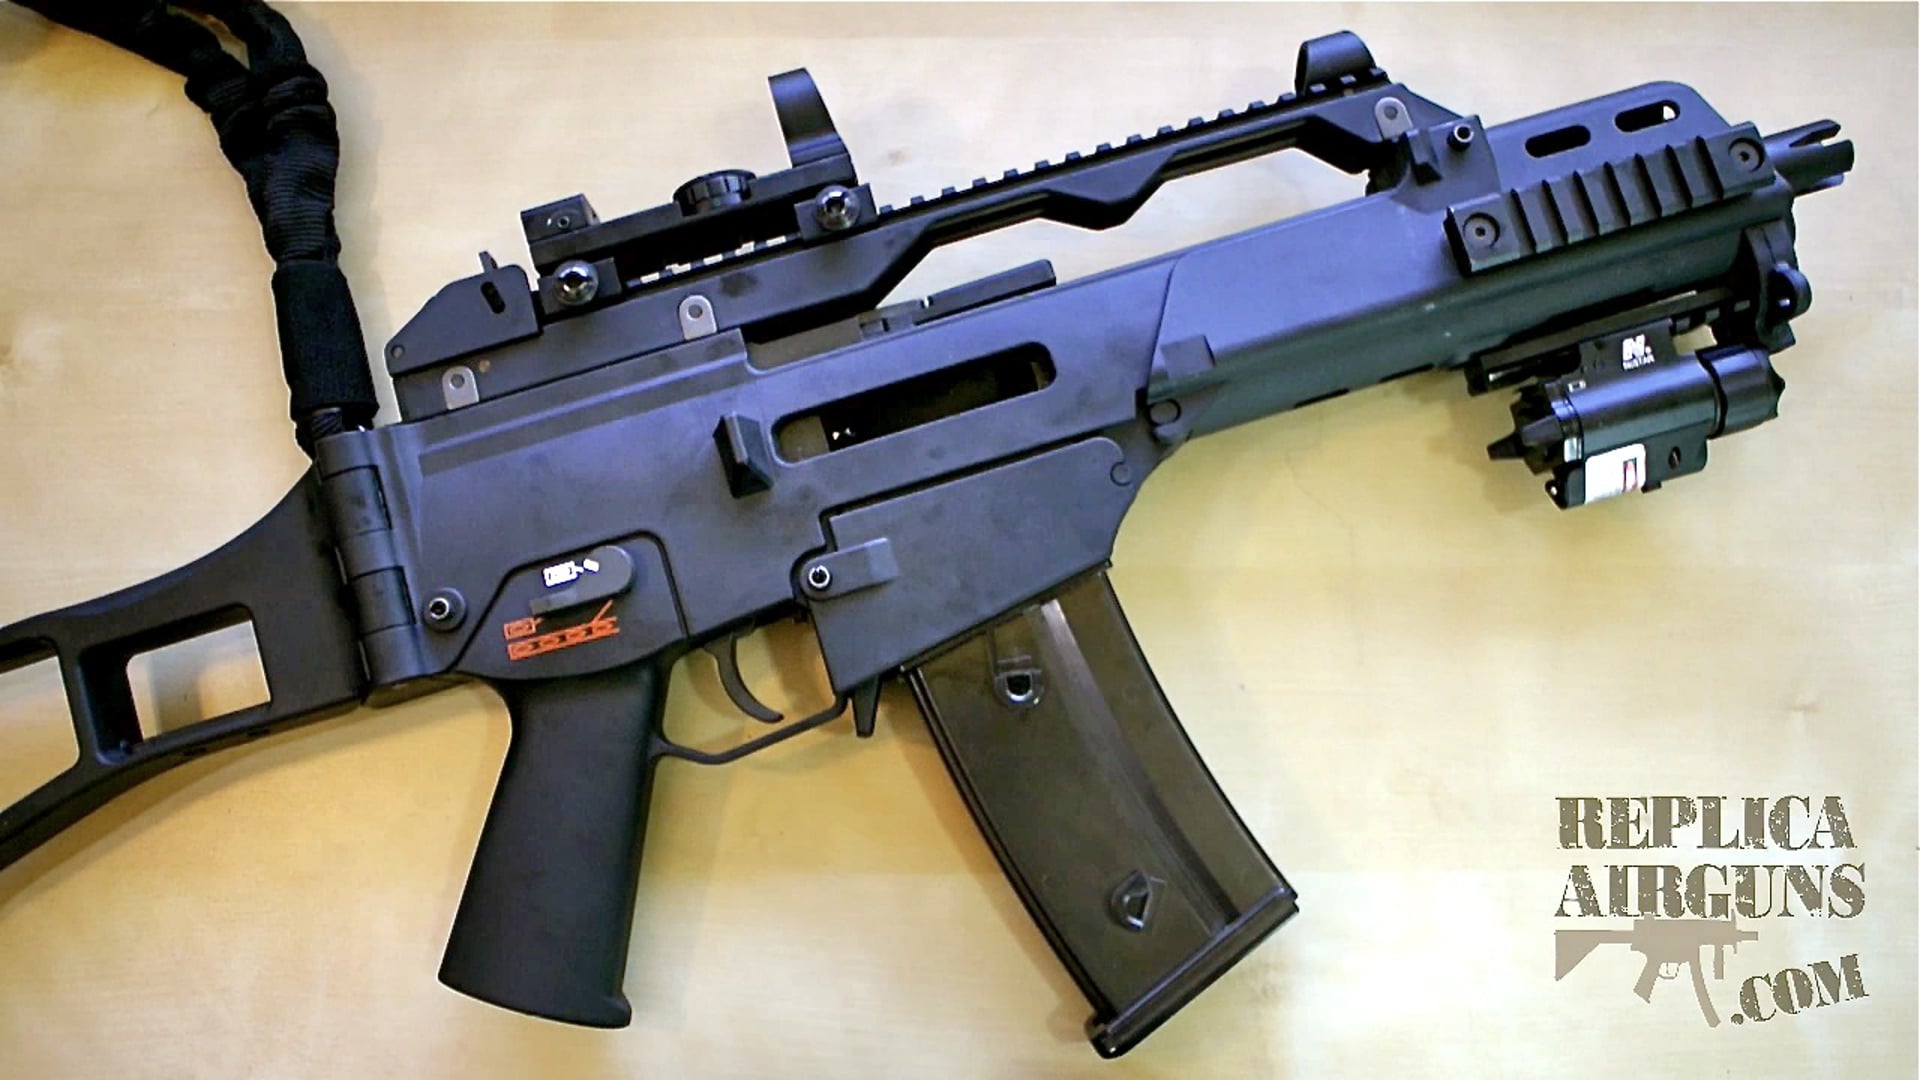 WE G39C GBB Airsoft Rifle Full Review